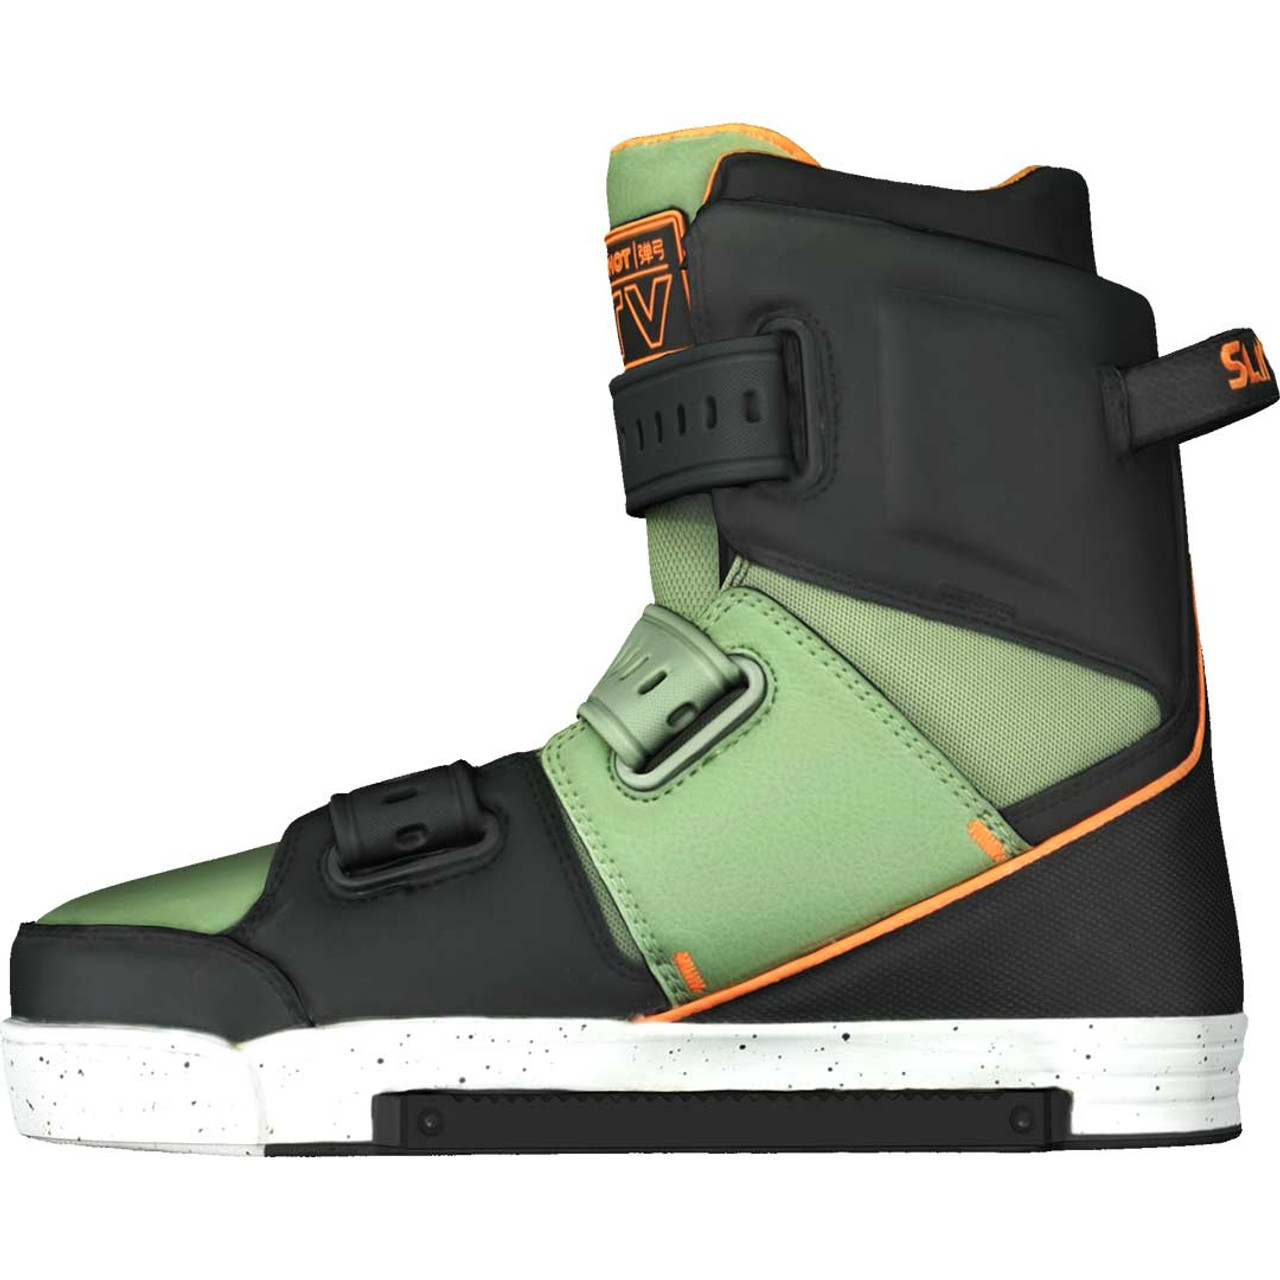 Slingshot Salmon Wakeboard Package W/ KTV Boots - 2021 | WakeHouse.com